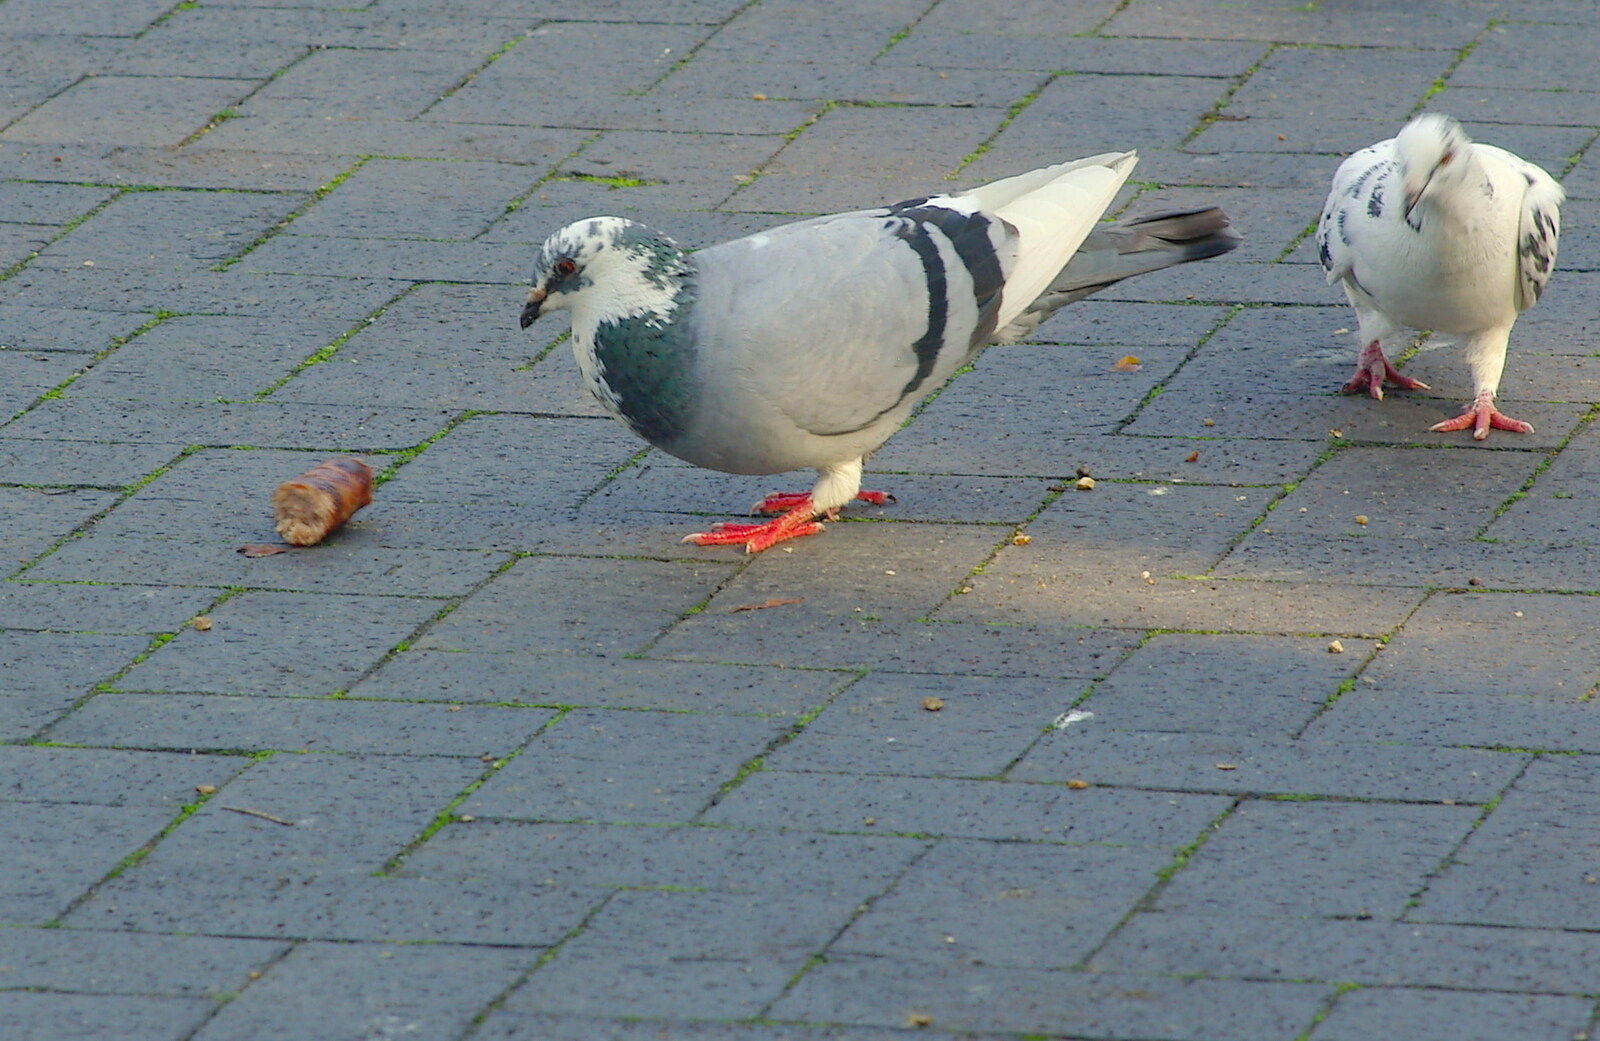 The Magic Numbers and Scenes of Diss, Norfolk - 15th October 2005: A pigeon pecks at some discarded sausage